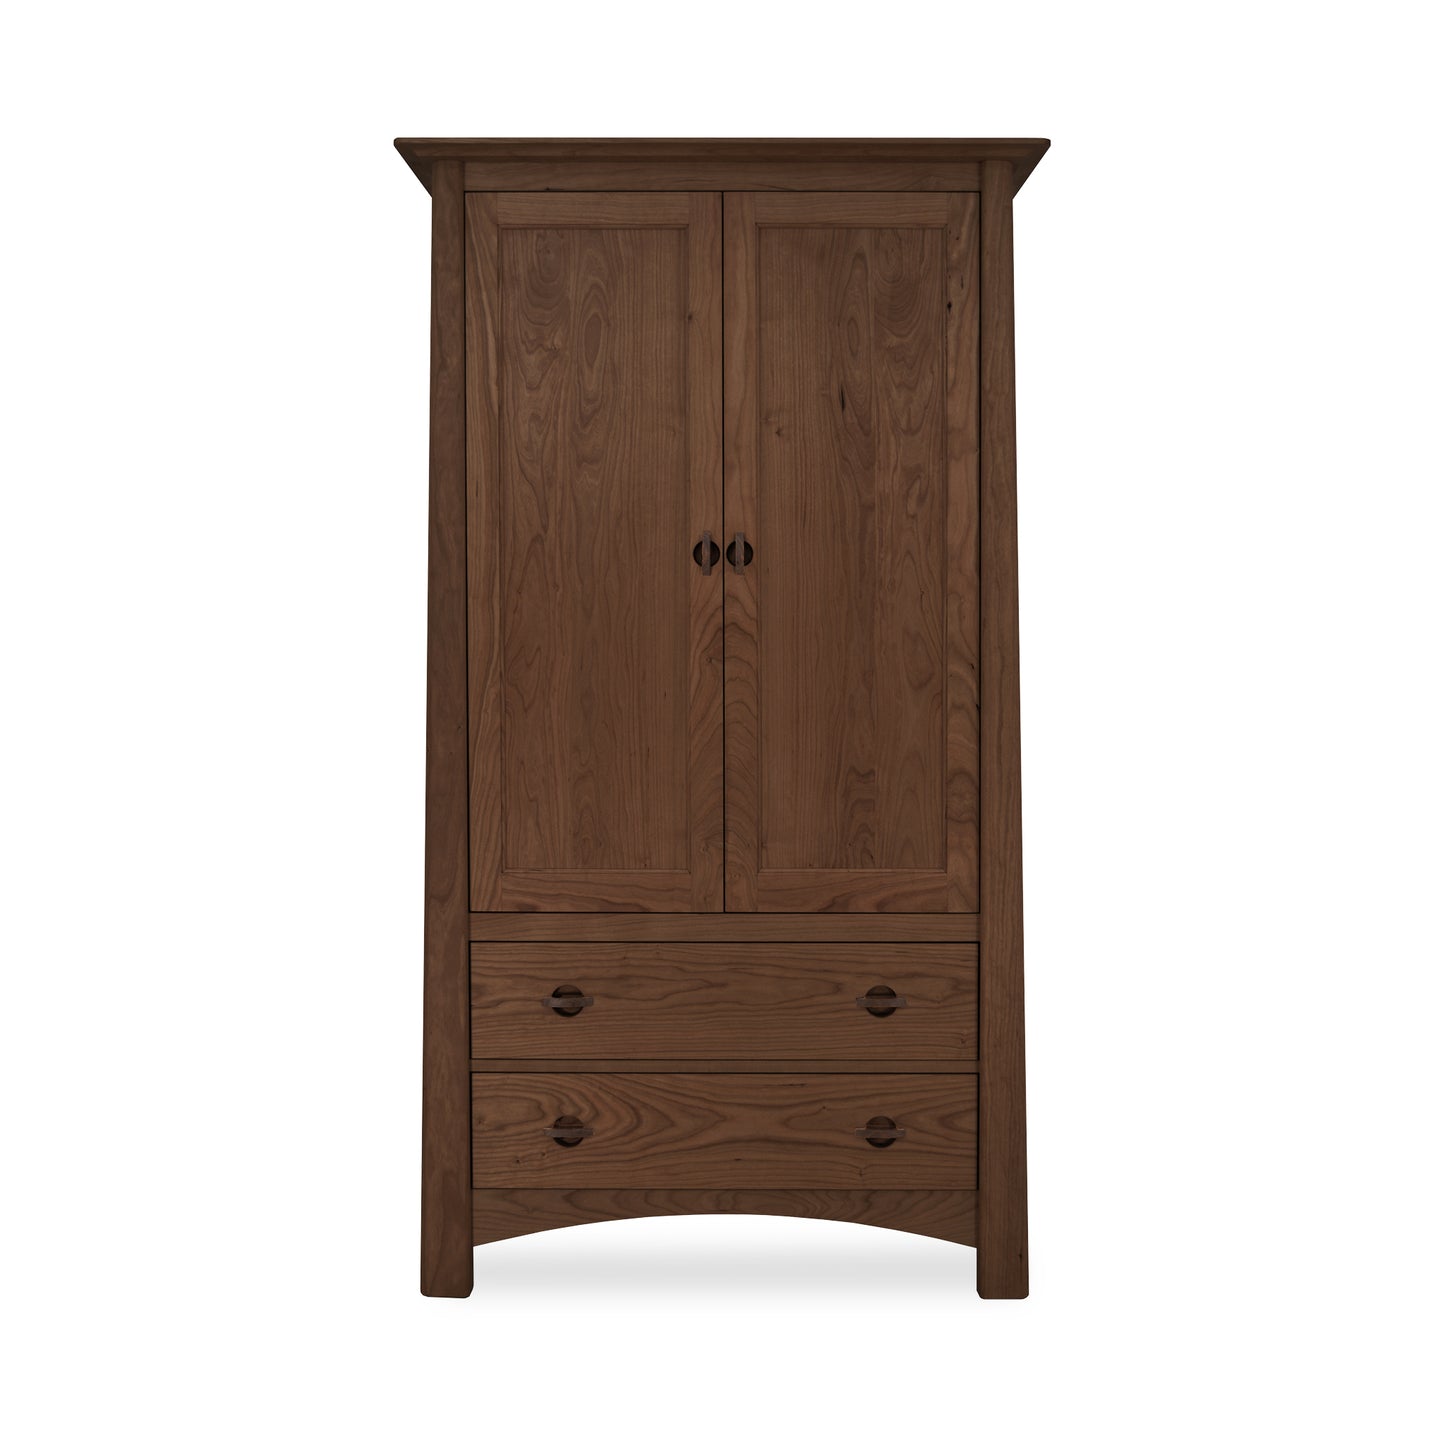 A Maple Corner Woodworks Cherry Moon Armoire with two doors and a lower drawer, showcasing Vermont craftsmanship and solid hardwood construction, set against a white background.